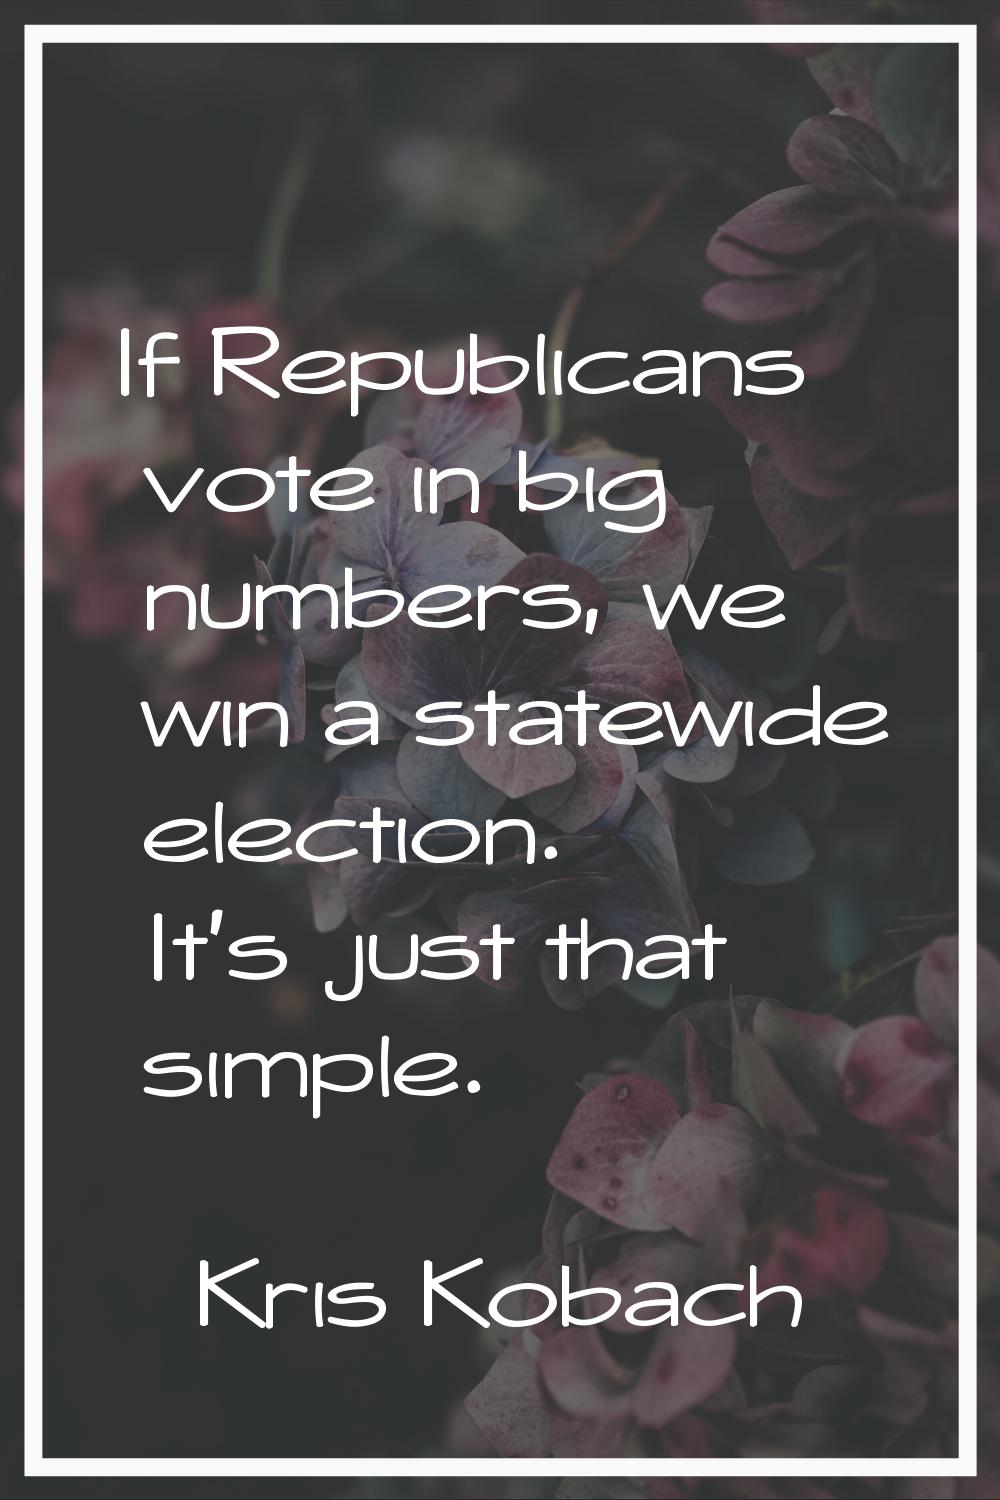 If Republicans vote in big numbers, we win a statewide election. It's just that simple.